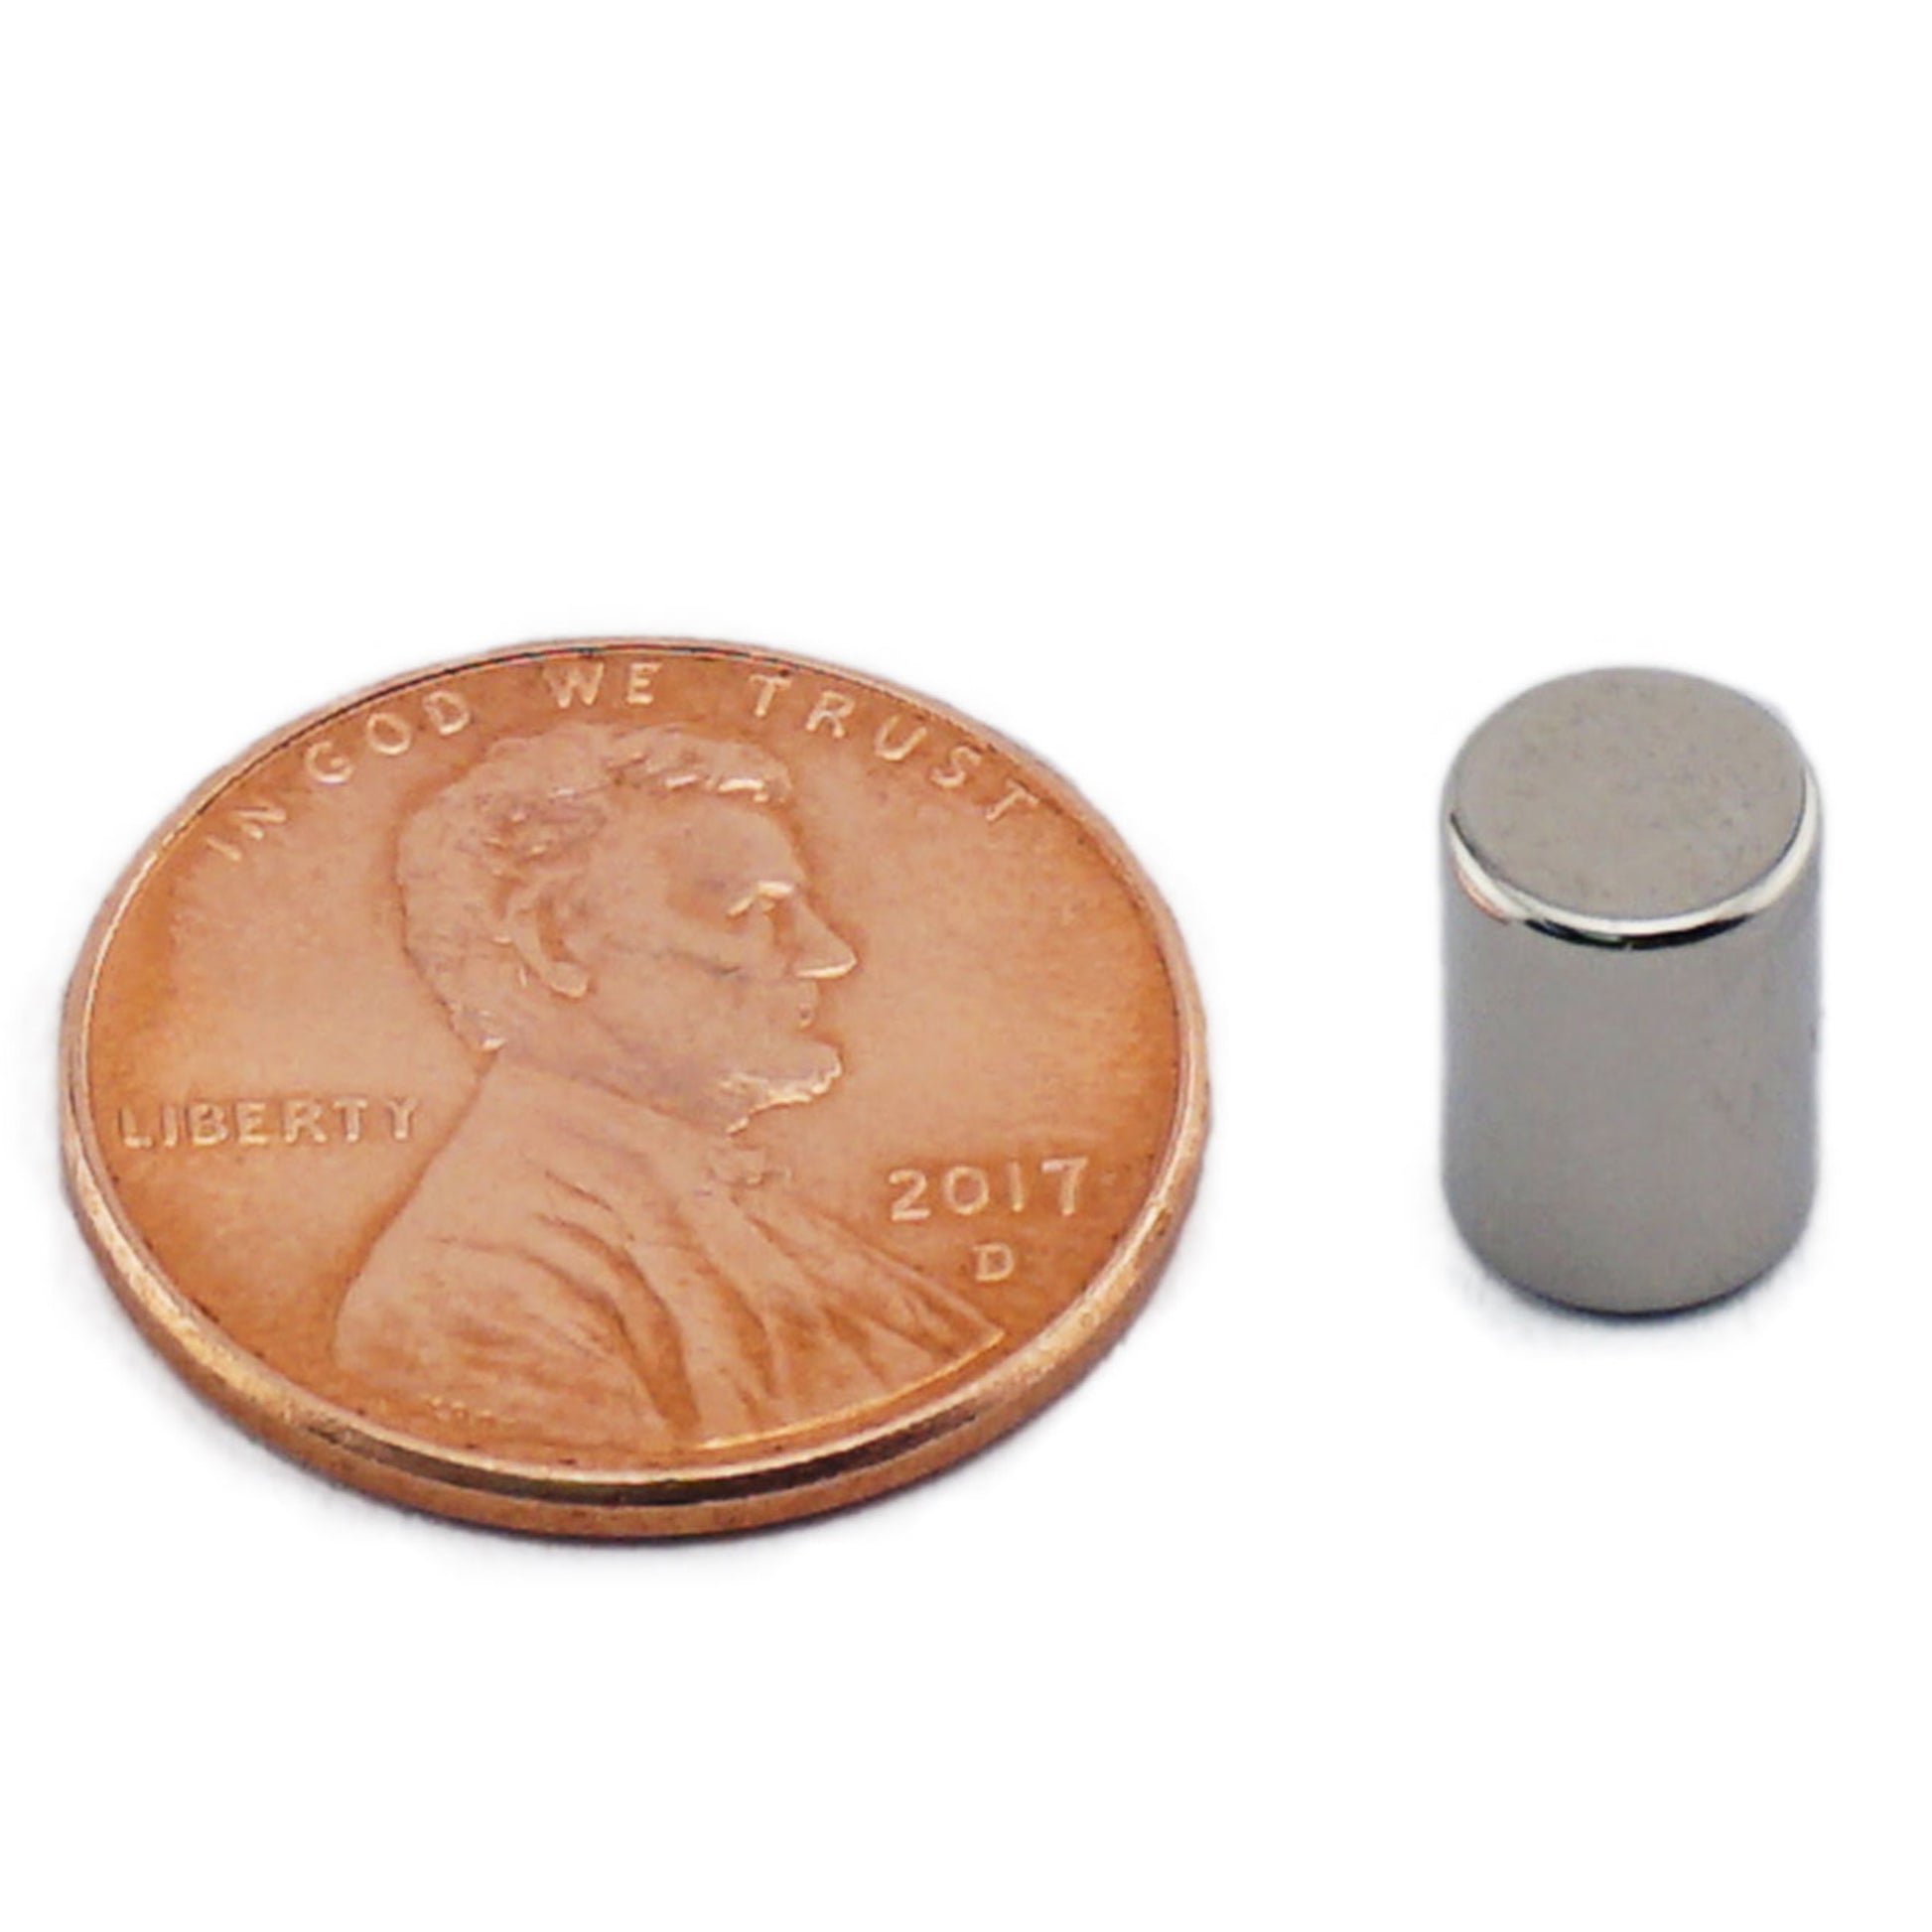 Load image into Gallery viewer, ND002511N Neodymium Disc Magnet - Compared to Penny for Size Reference